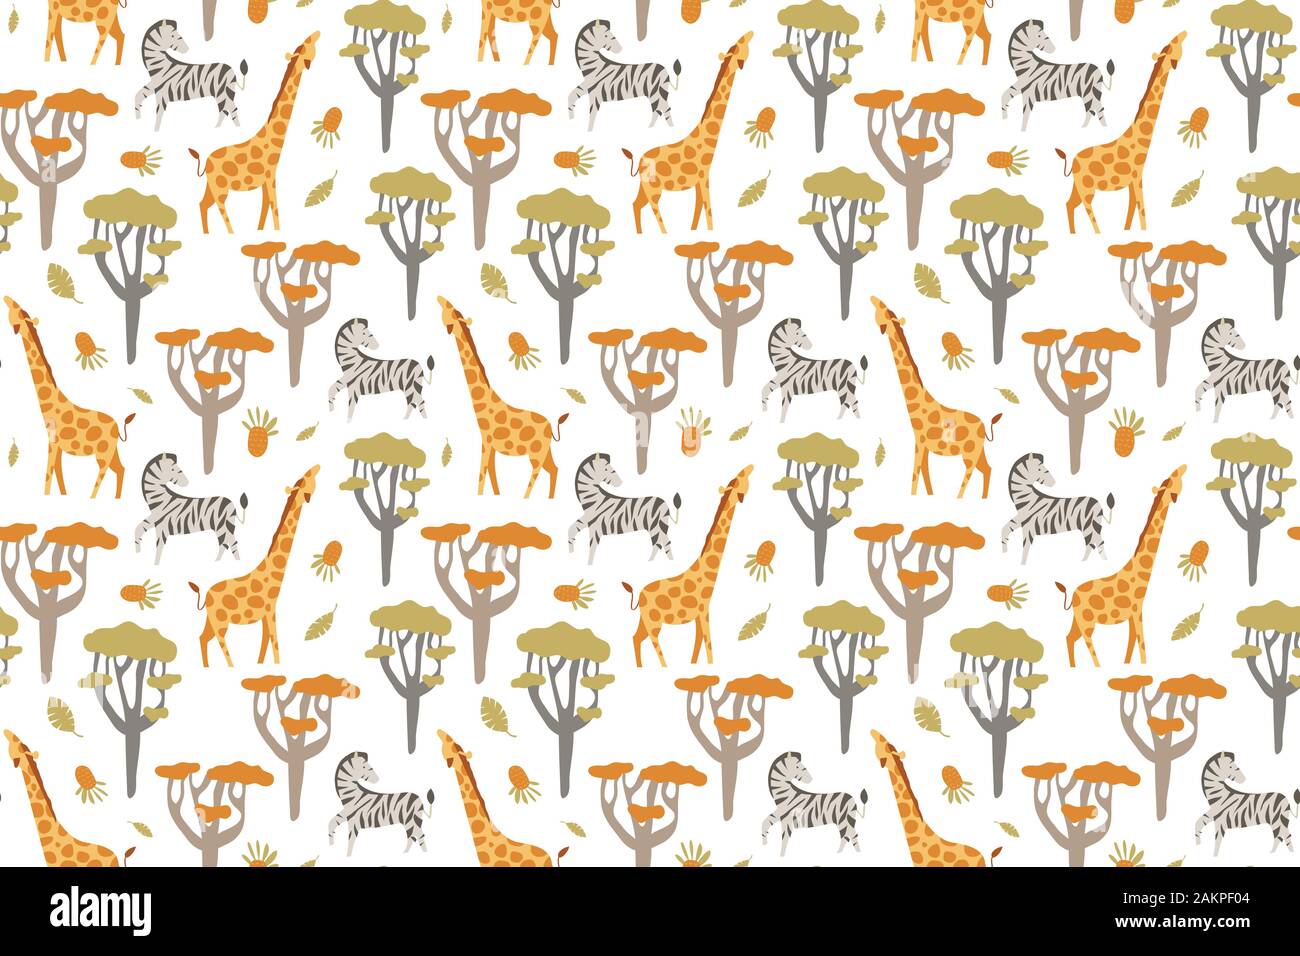 Seamless pattern zebra and giraffe with african concept. creative pattern texture for fabric, wrapping, textile, wallpaper, apparel. Stock Vector